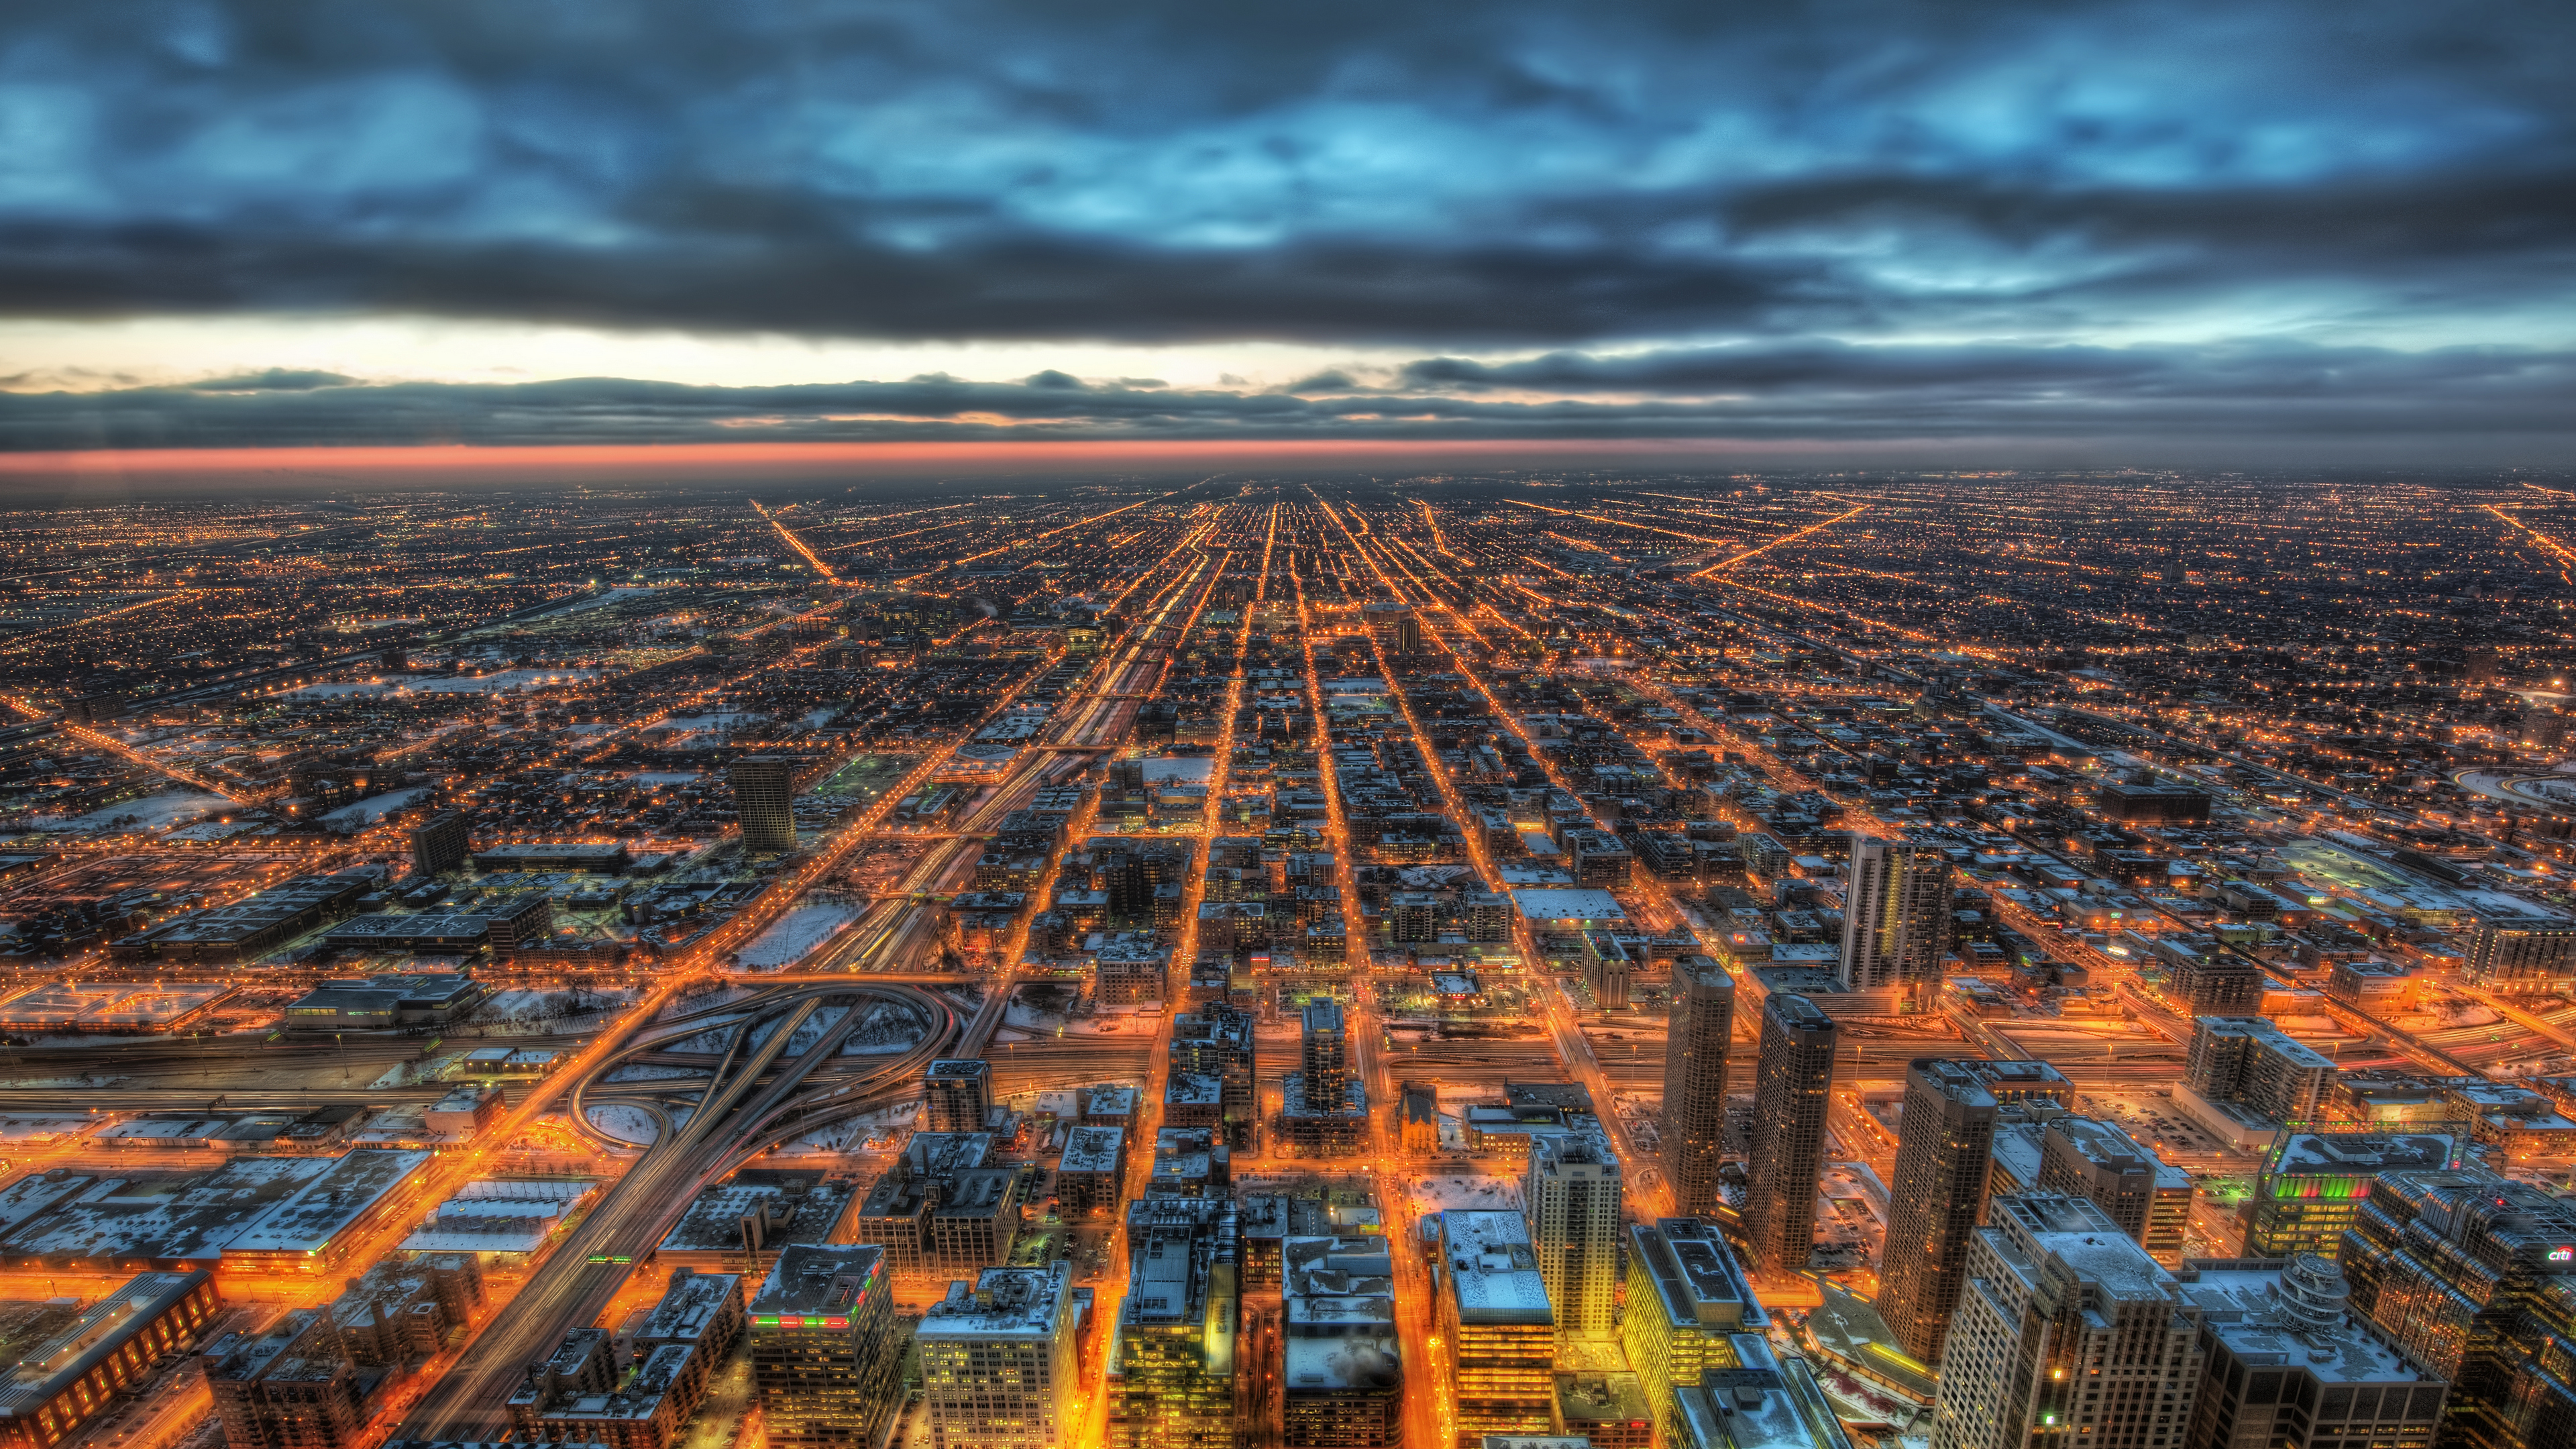 General 3840x2160 Trey Ratcliff photography Chicago USA cityscape lights horizon road building skyscraper sky clouds city lights city